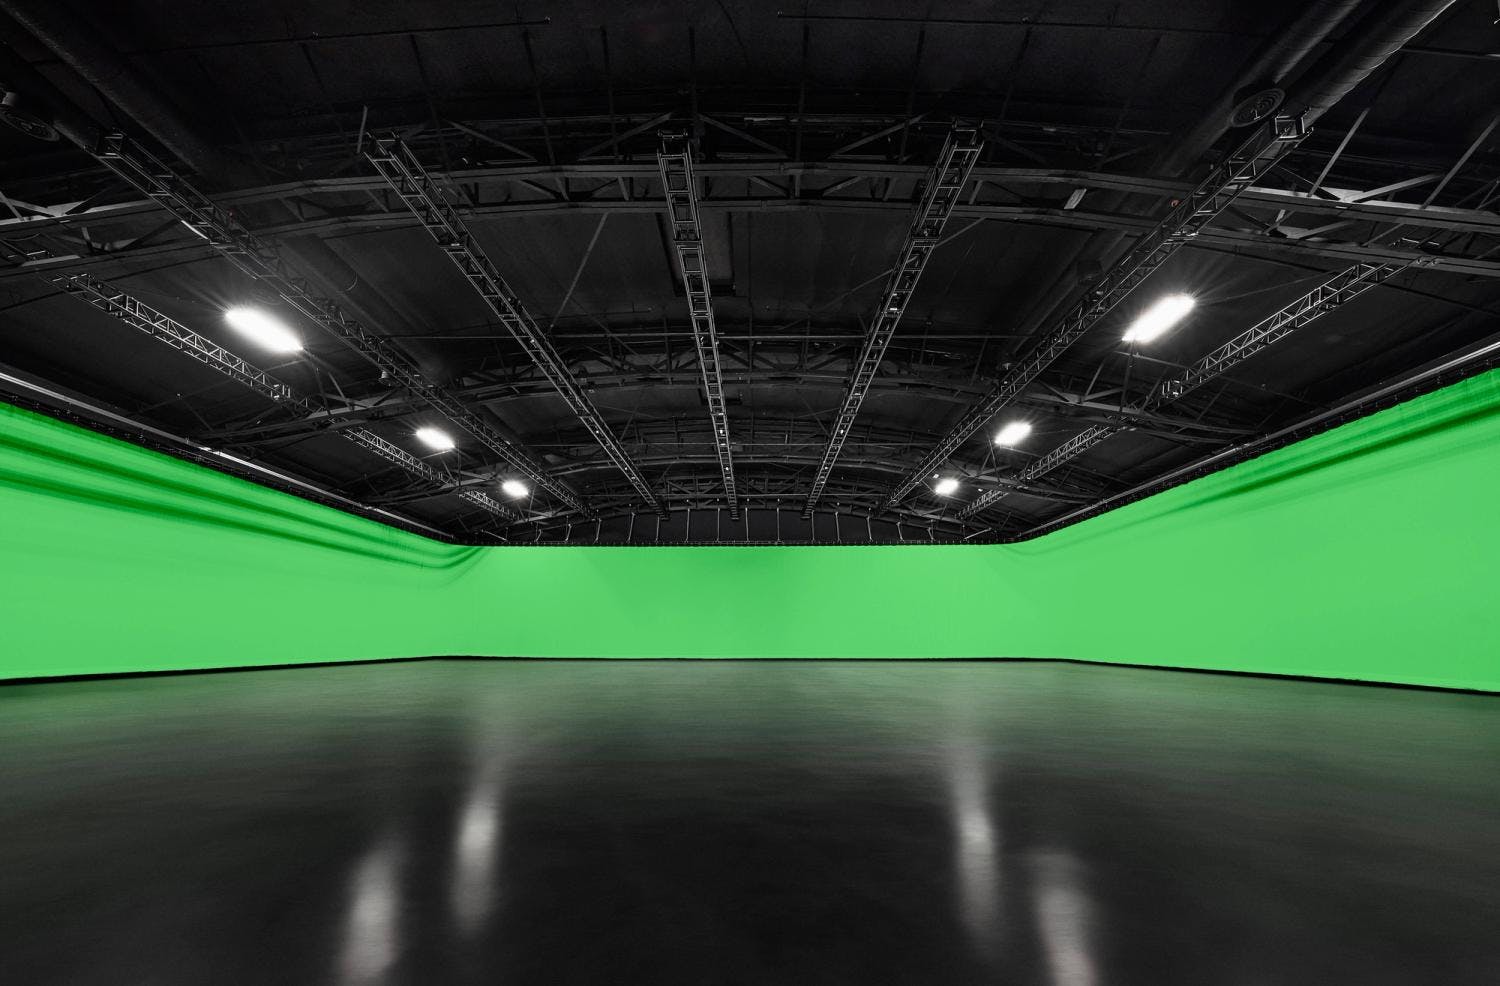 A spacious indoor studio with a curved green cyclorama wall and ceiling rigging for stage lighting.